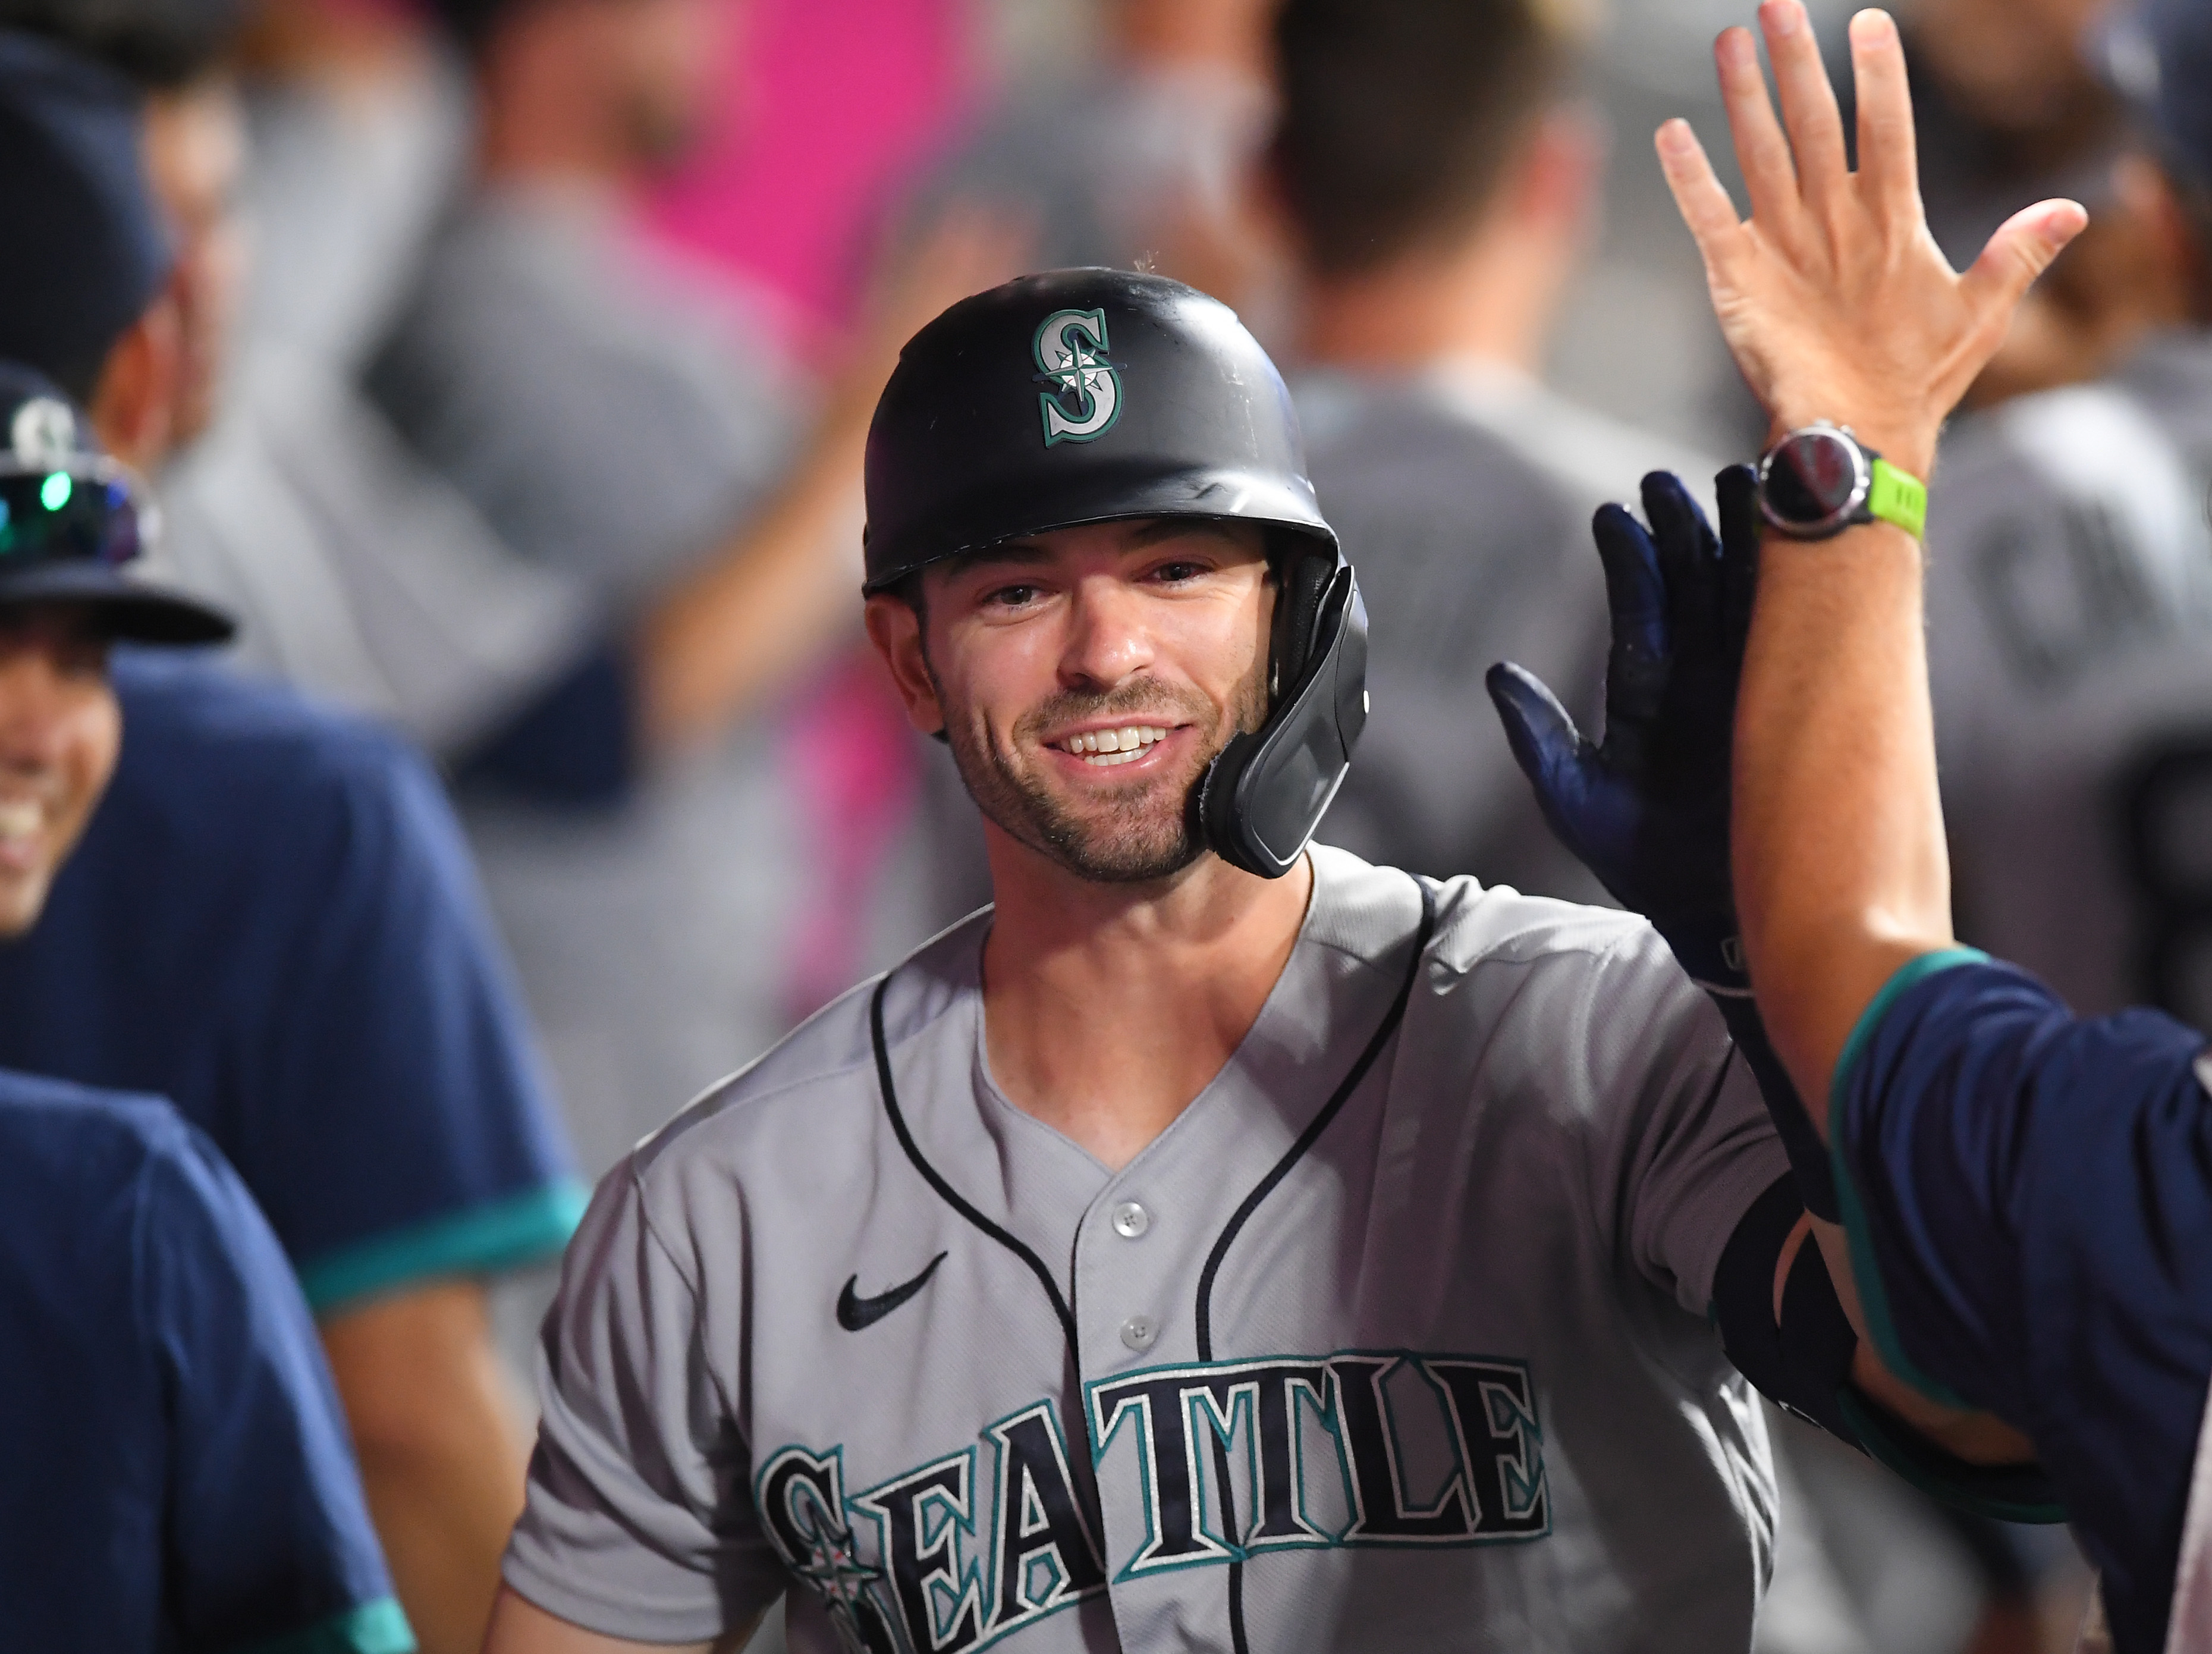 OF Mitch Haniger agrees to 3-year, $43.5 million deal with Giants